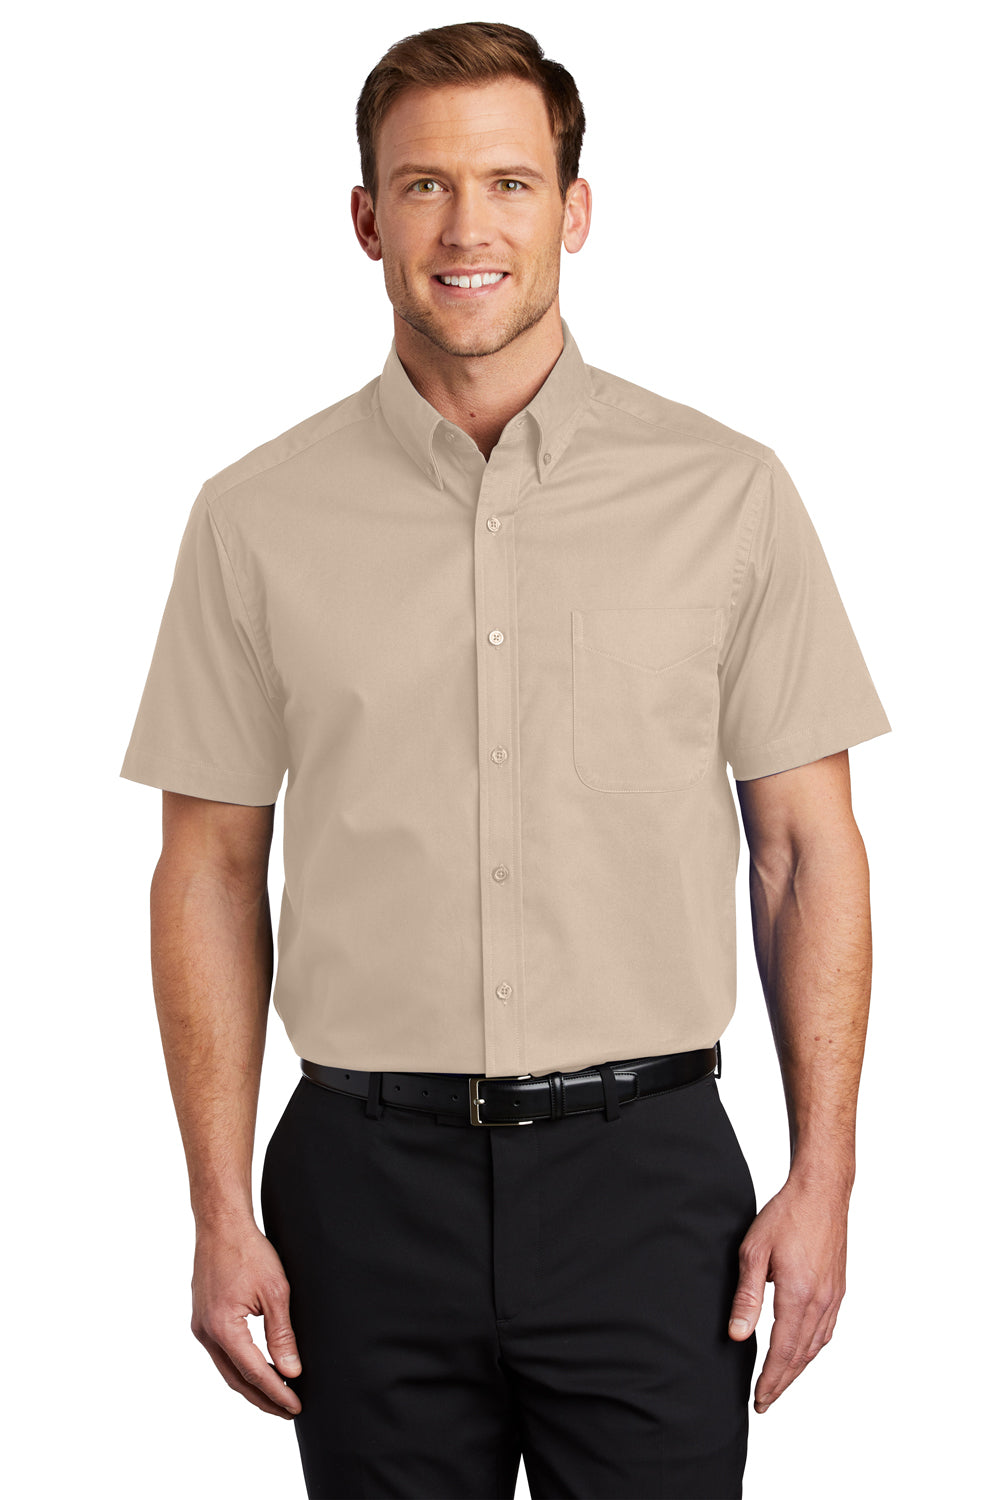 Port Authority S508/TLS508 Mens Easy Care Wrinkle Resistant Short Sleeve Button Down Shirt w/ Pocket Stone Front